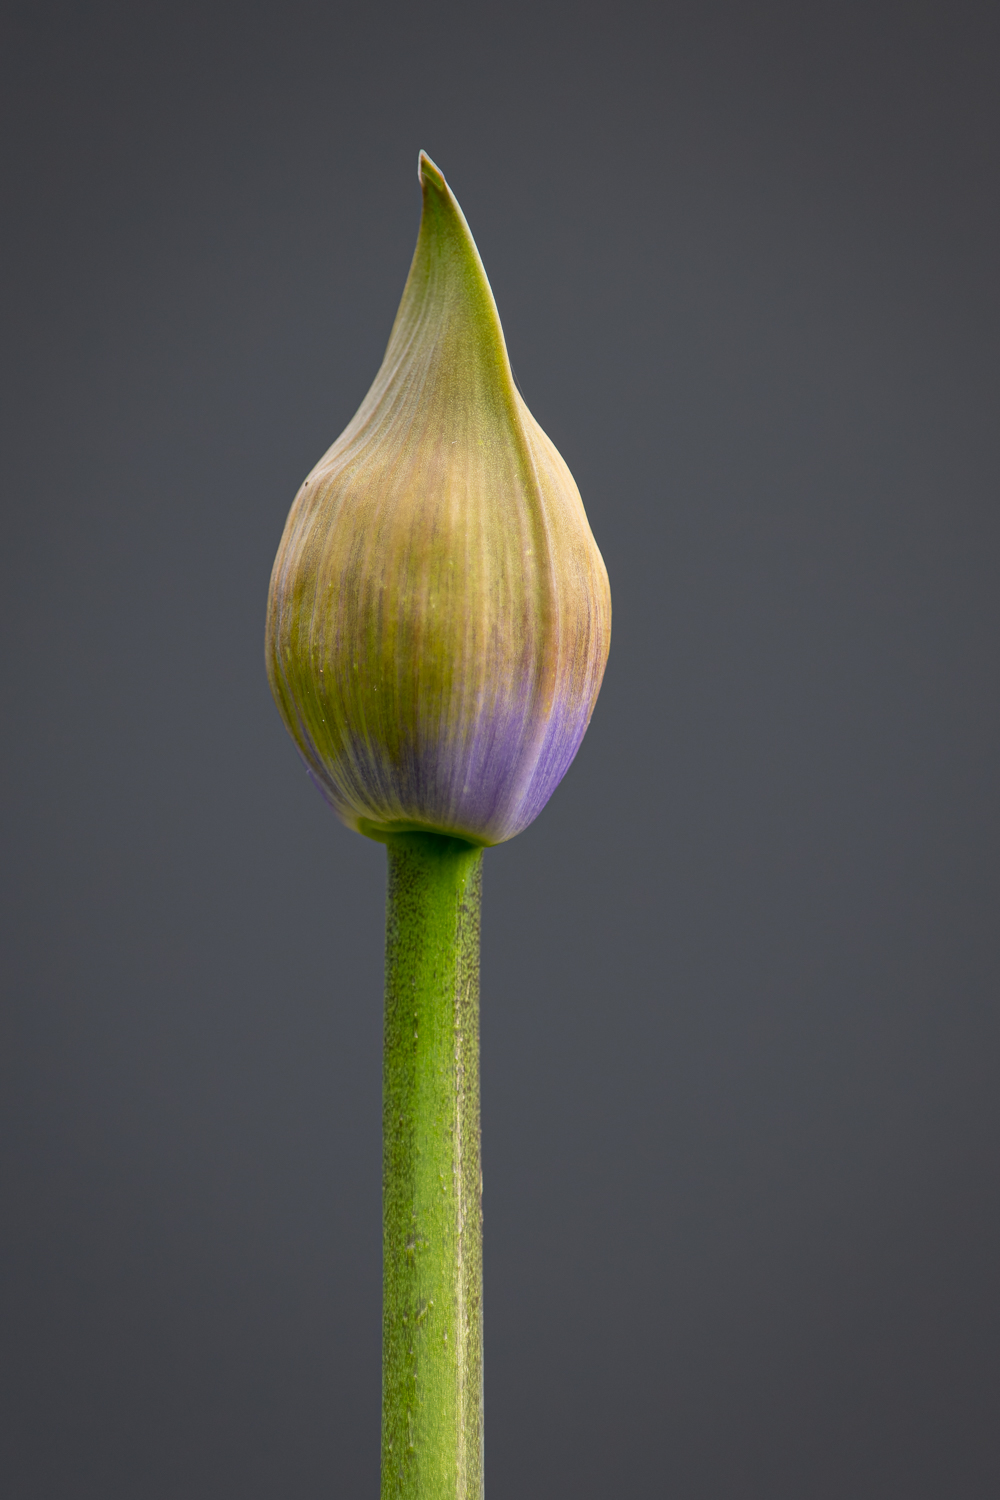 A yellow and purple agapanthus bud against a dark background